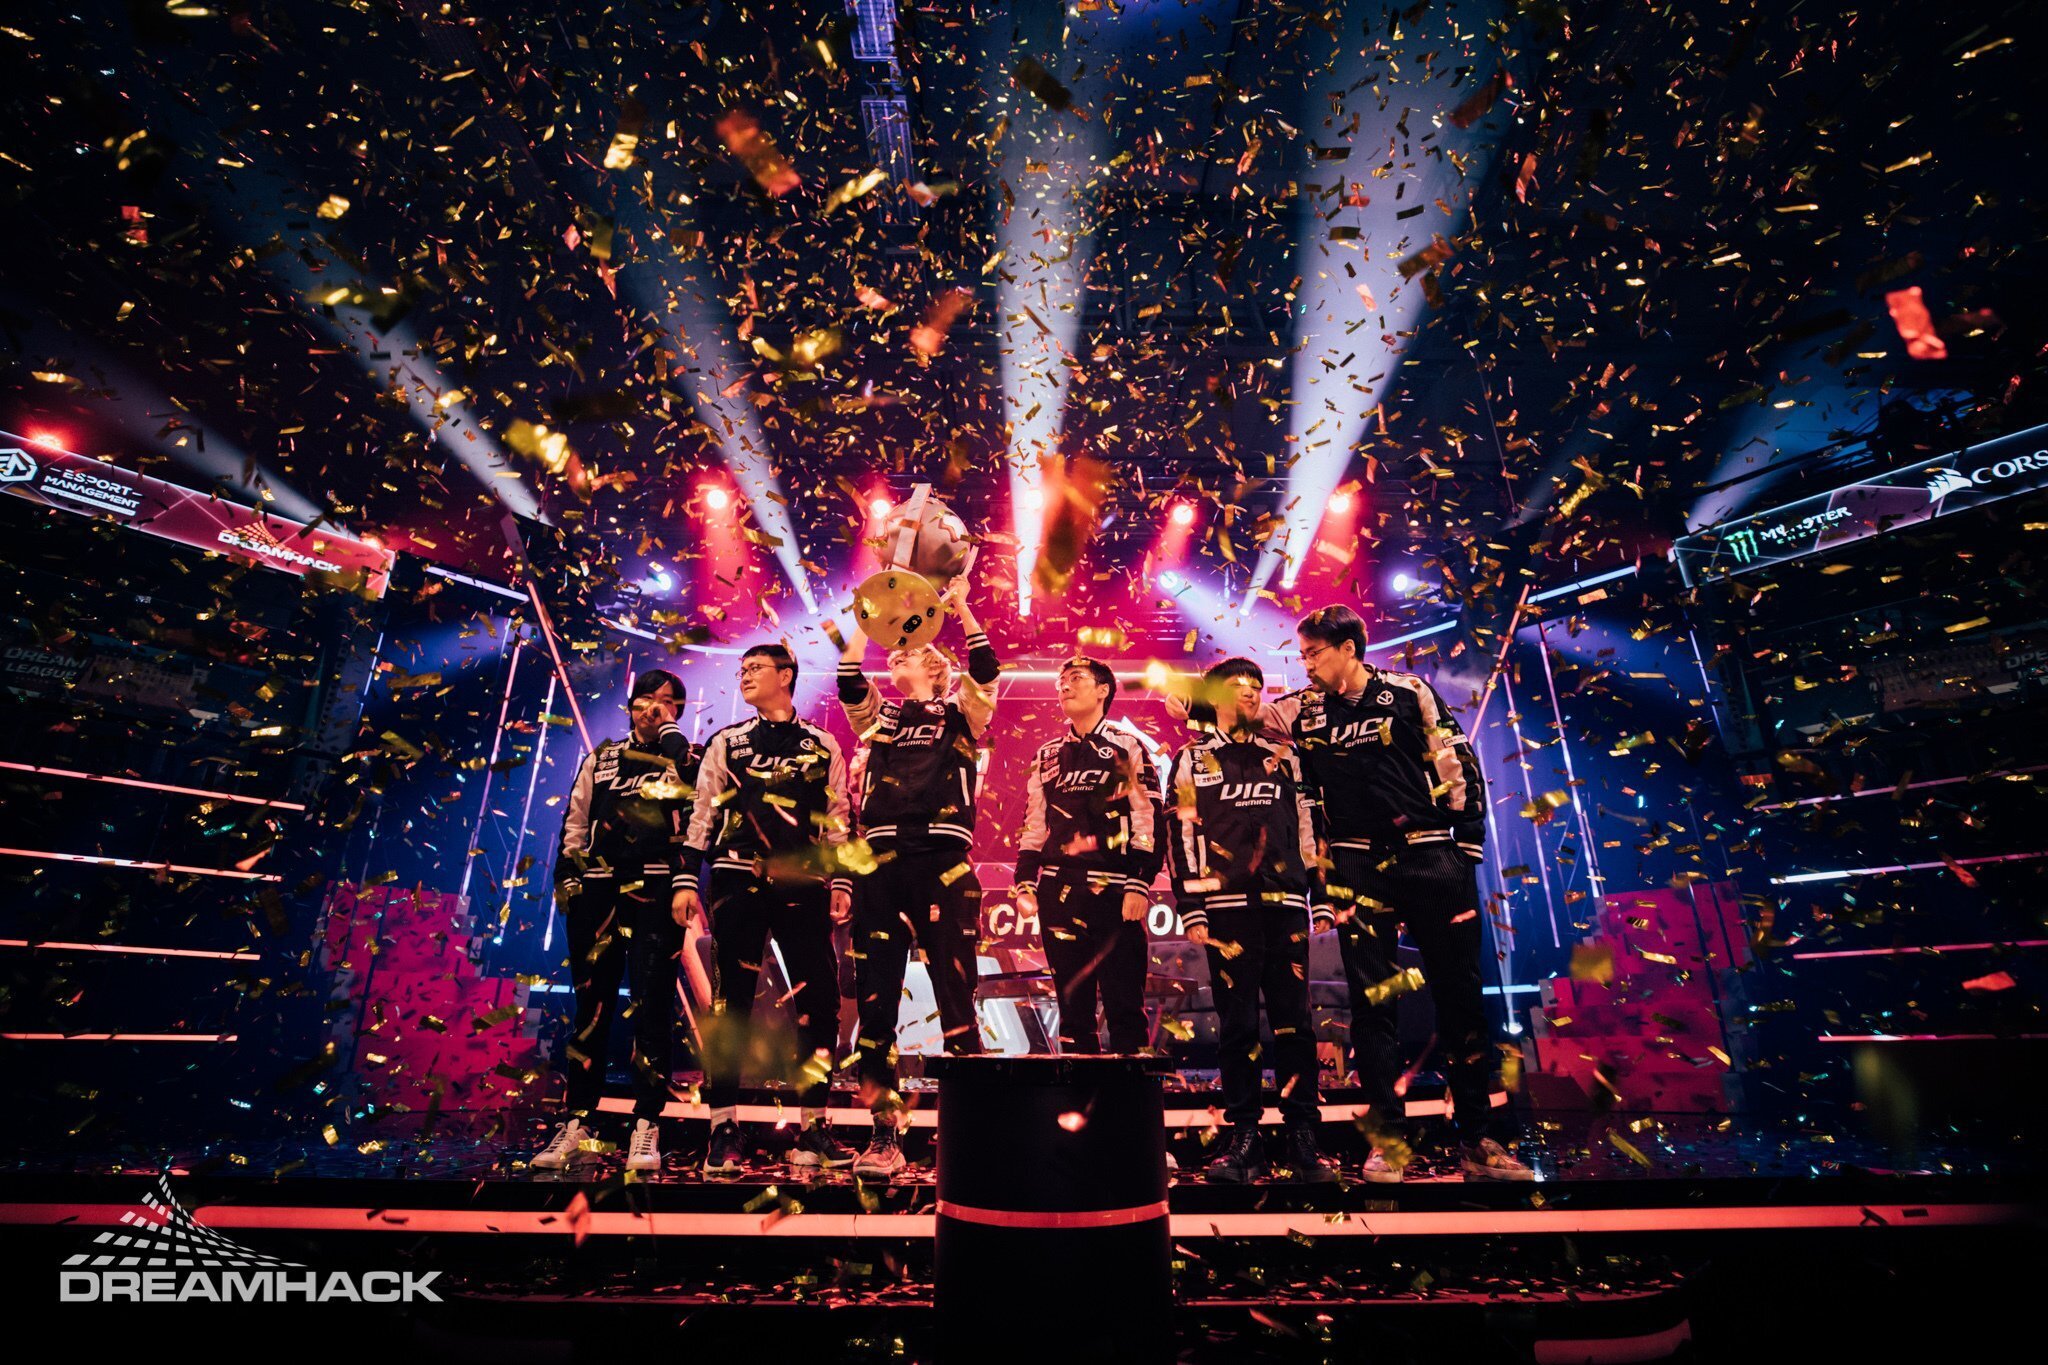 Vici Gaming take home the trophy at the DreamLeague Season 11 Major. (Photo courtesy of DreamHack)